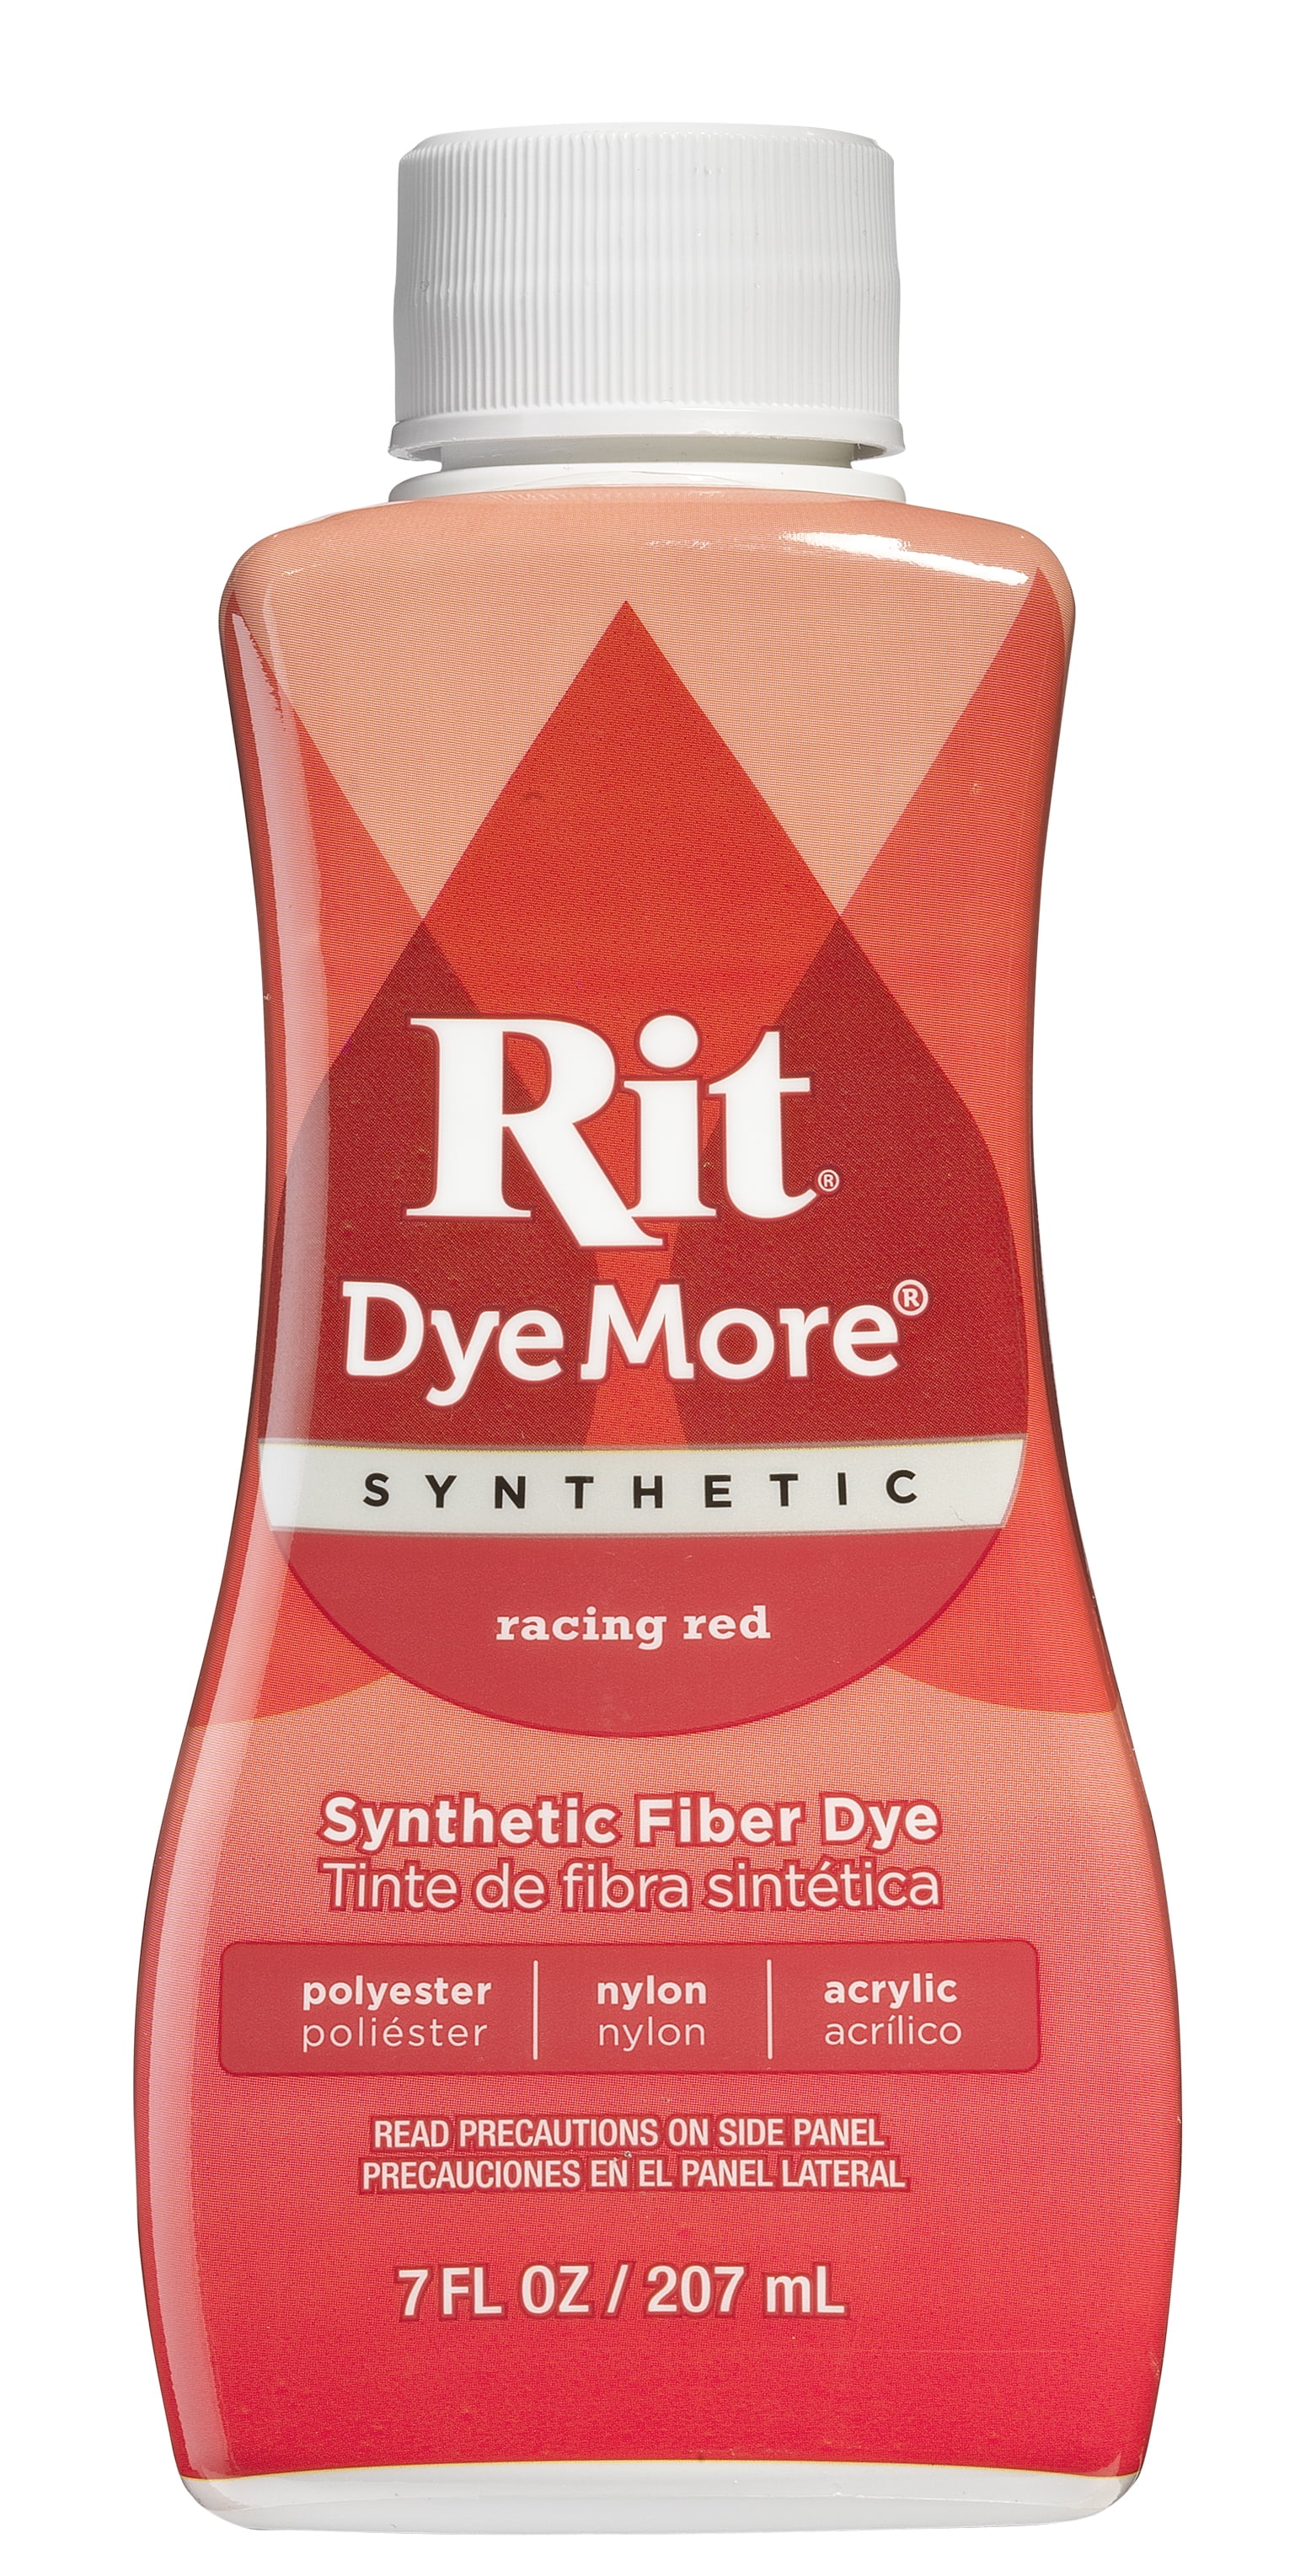 Rit DyeMore Dye for Synthetics, Racing Red, 7 fl.oz. 